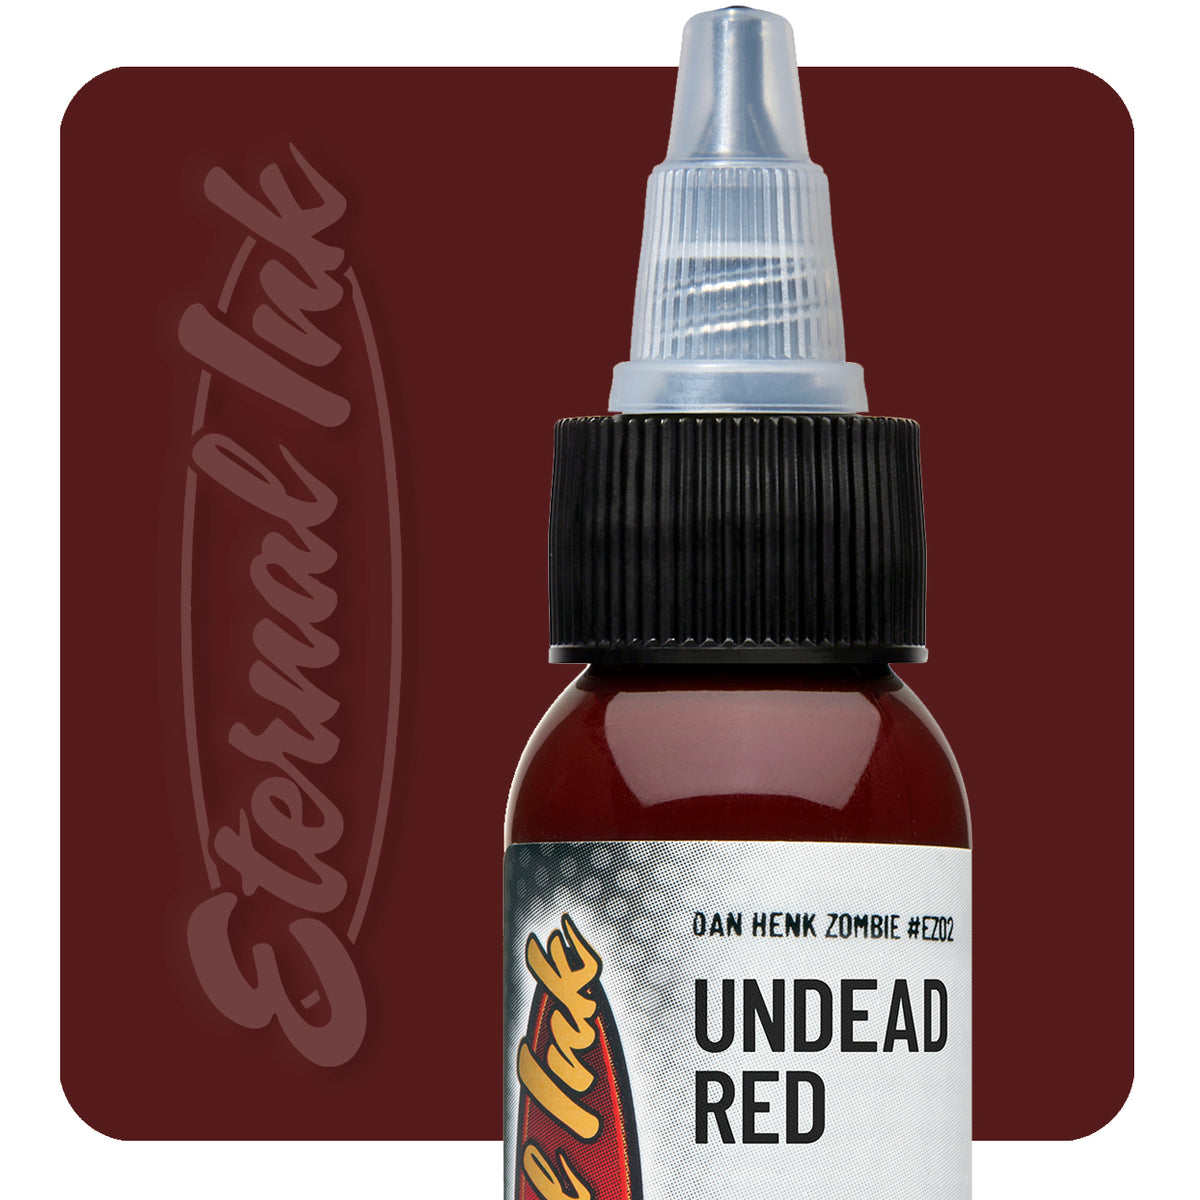 Undead Red